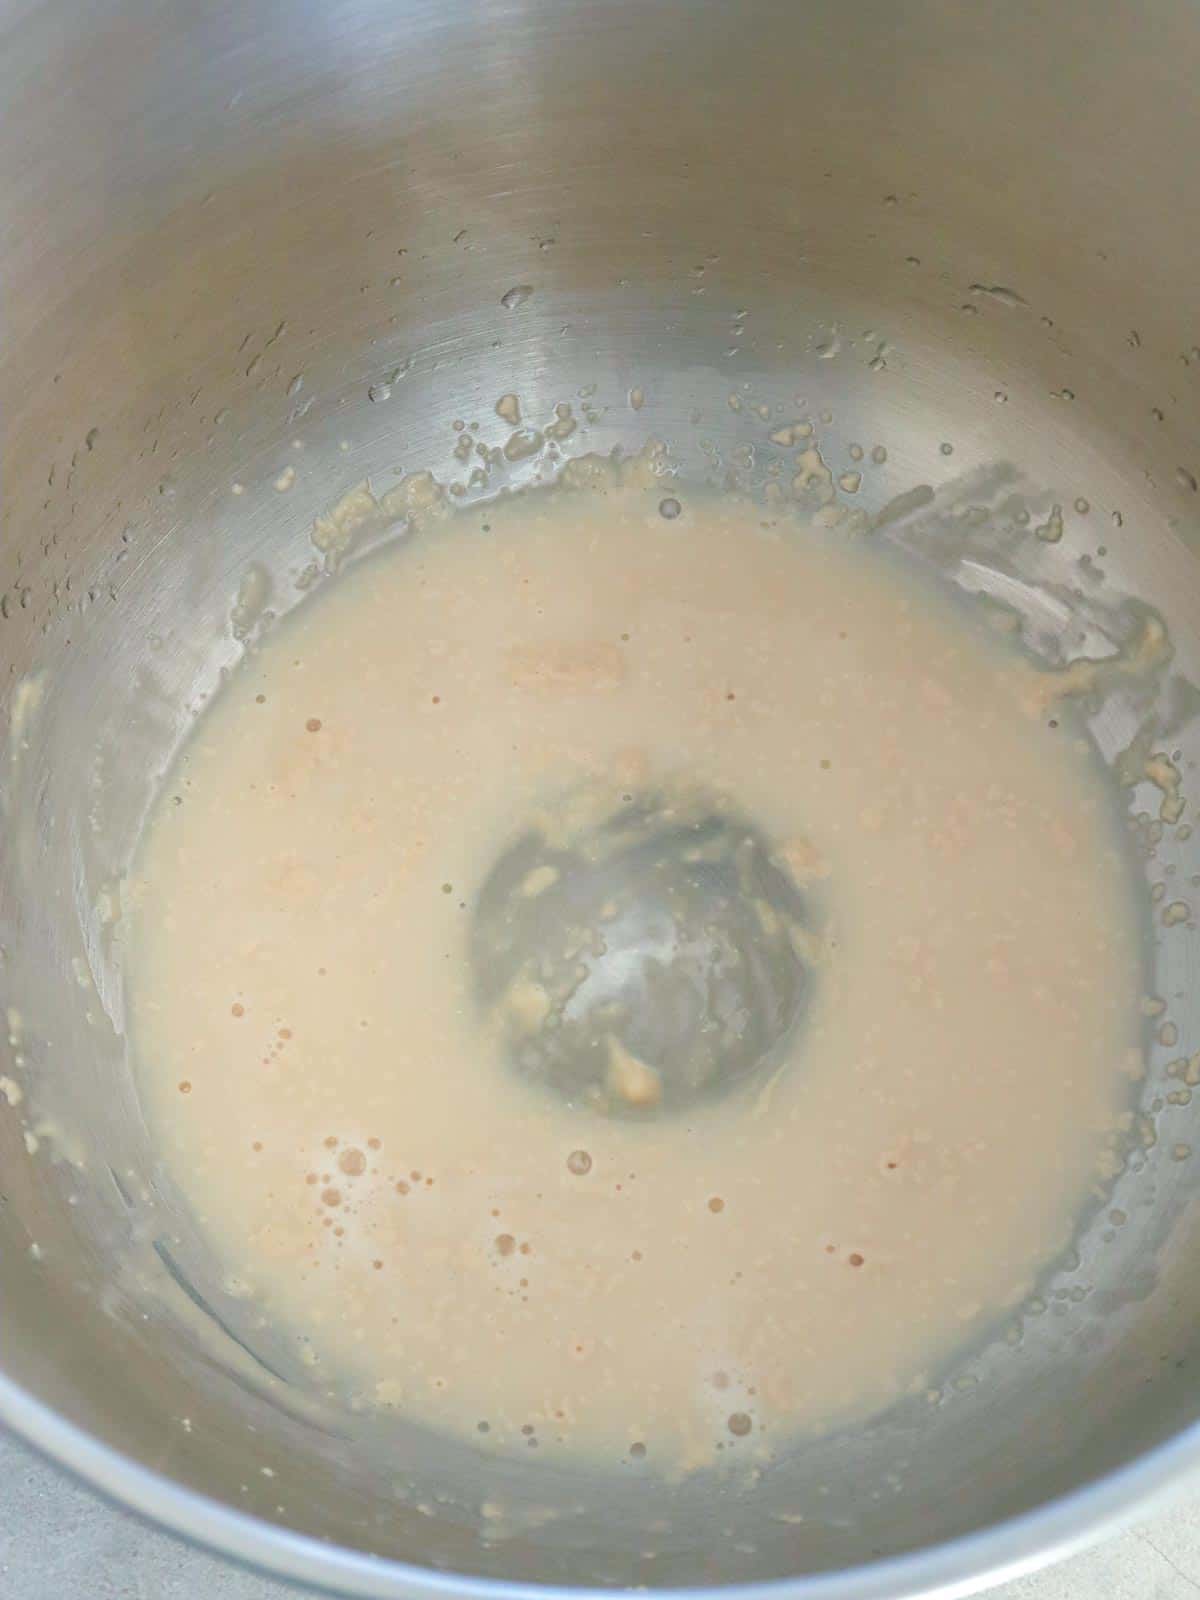 proofing yeast in mixer bowl